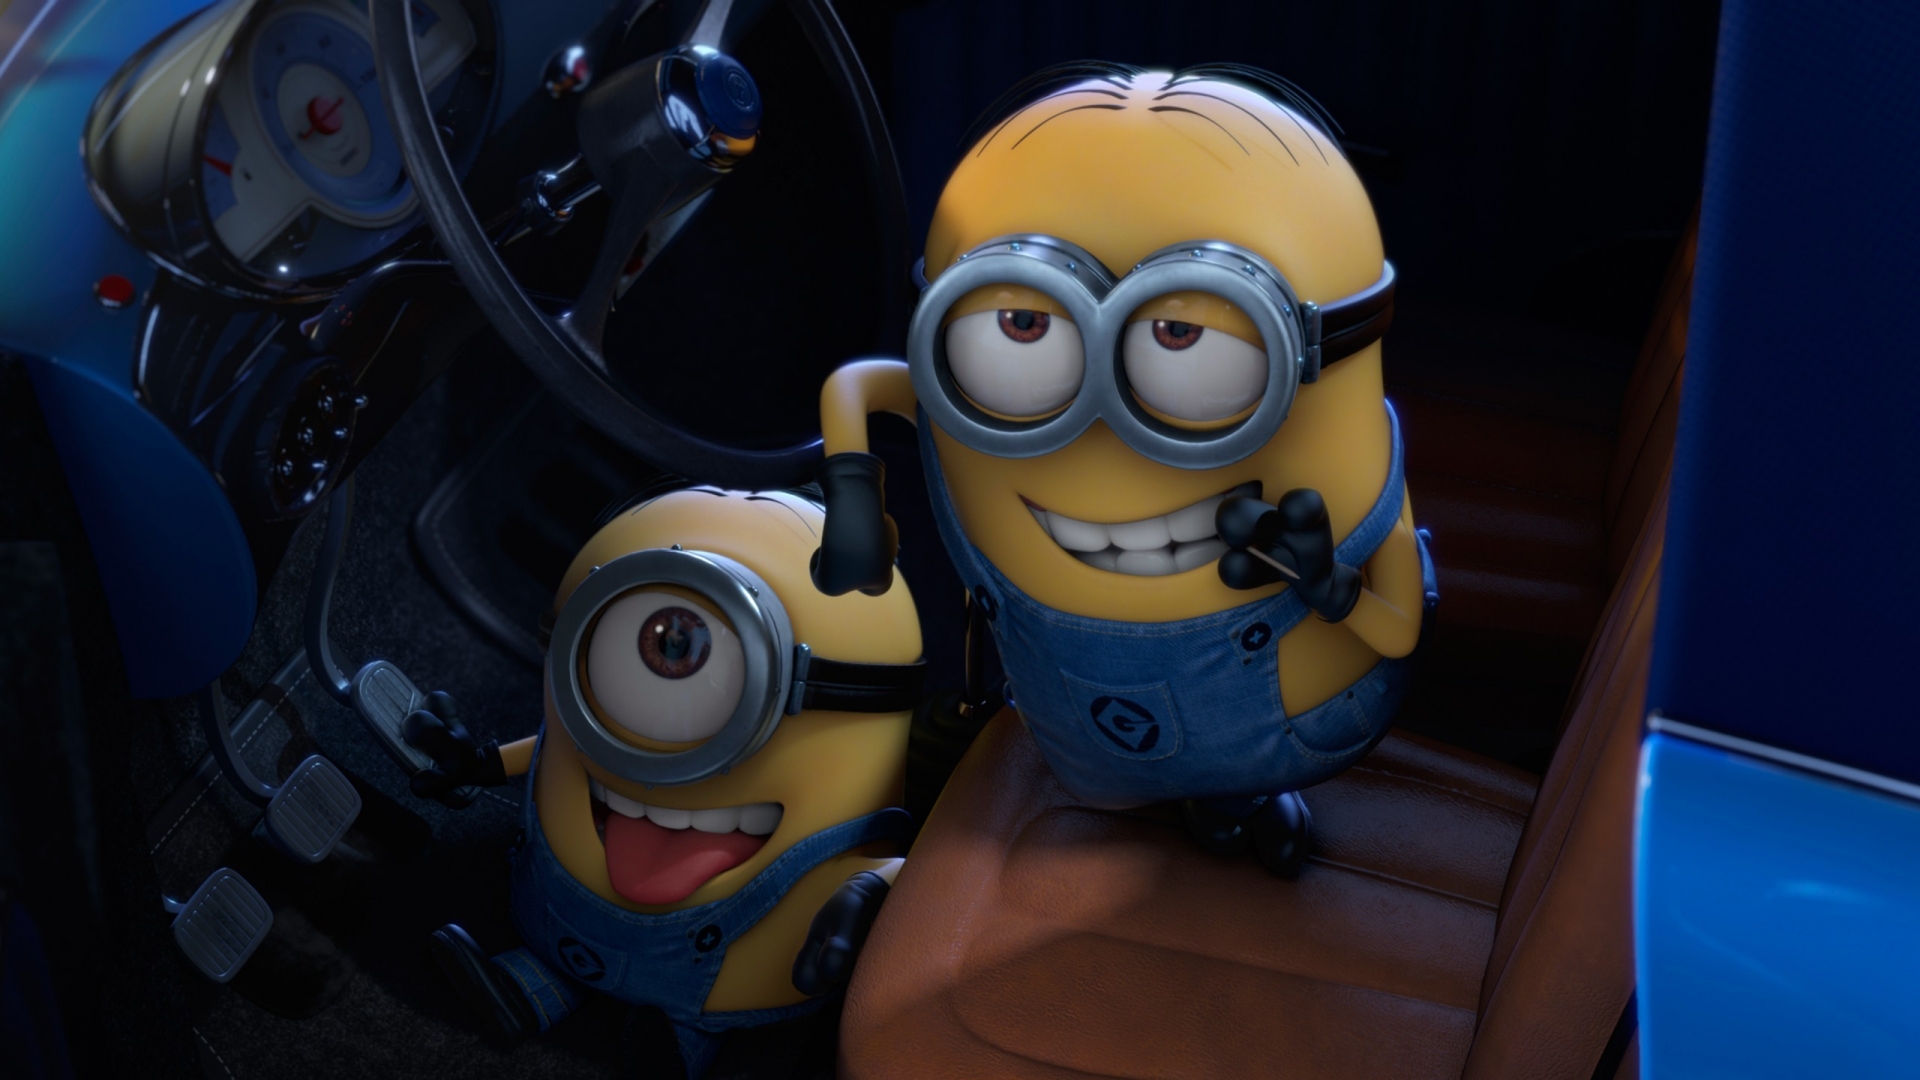 Despicable Me 2 Smile for 1920 x 1080 HDTV 1080p resolution